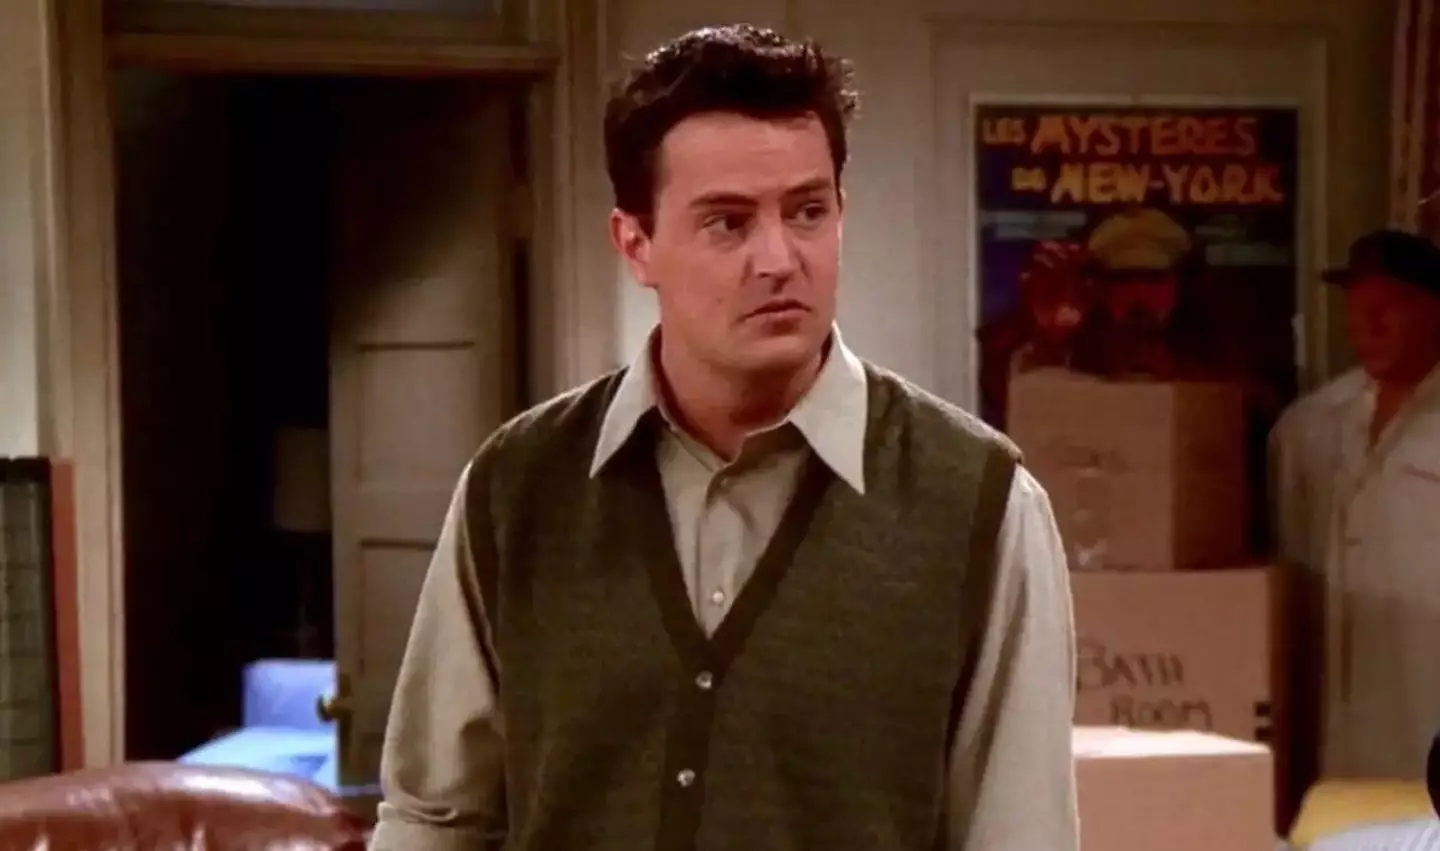 The actor rose to global fame for his role in Friends.